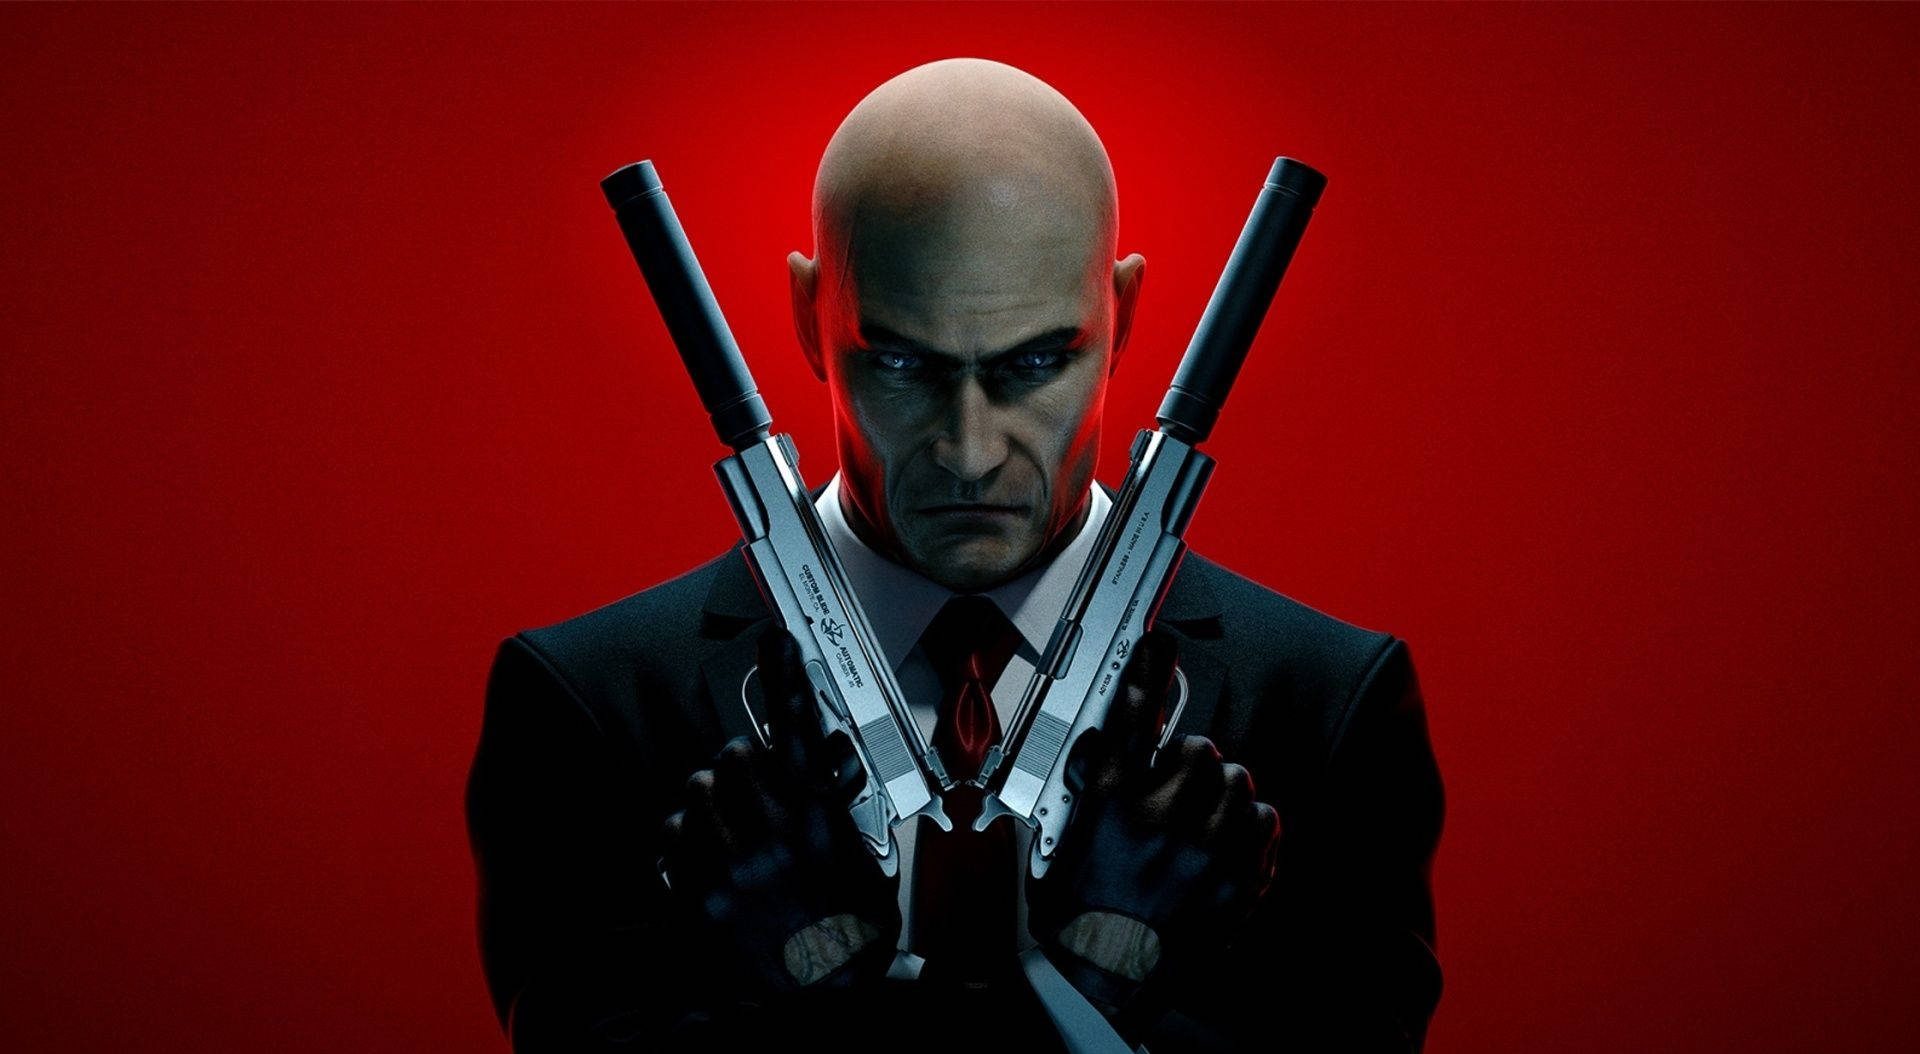 Real Hitman With Guns Red Aesthetic Wallpaper